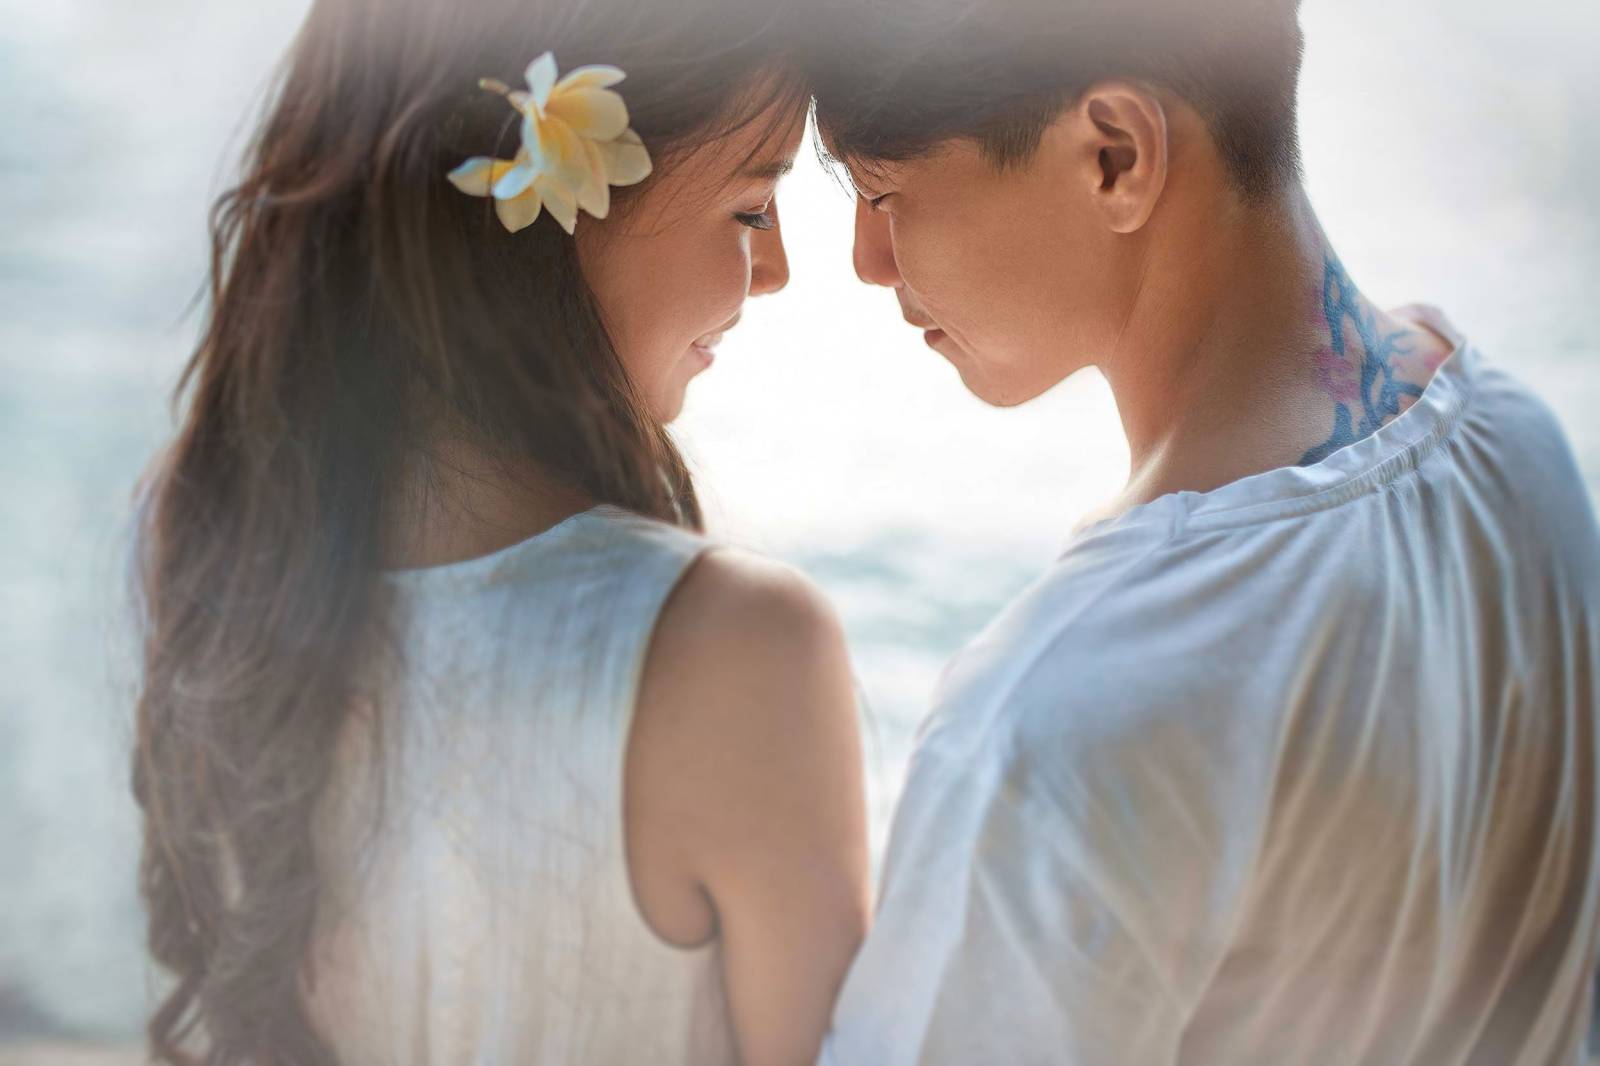 Romantic portrait by a Koh Samui photographer capturing an affectionate moment between a couple